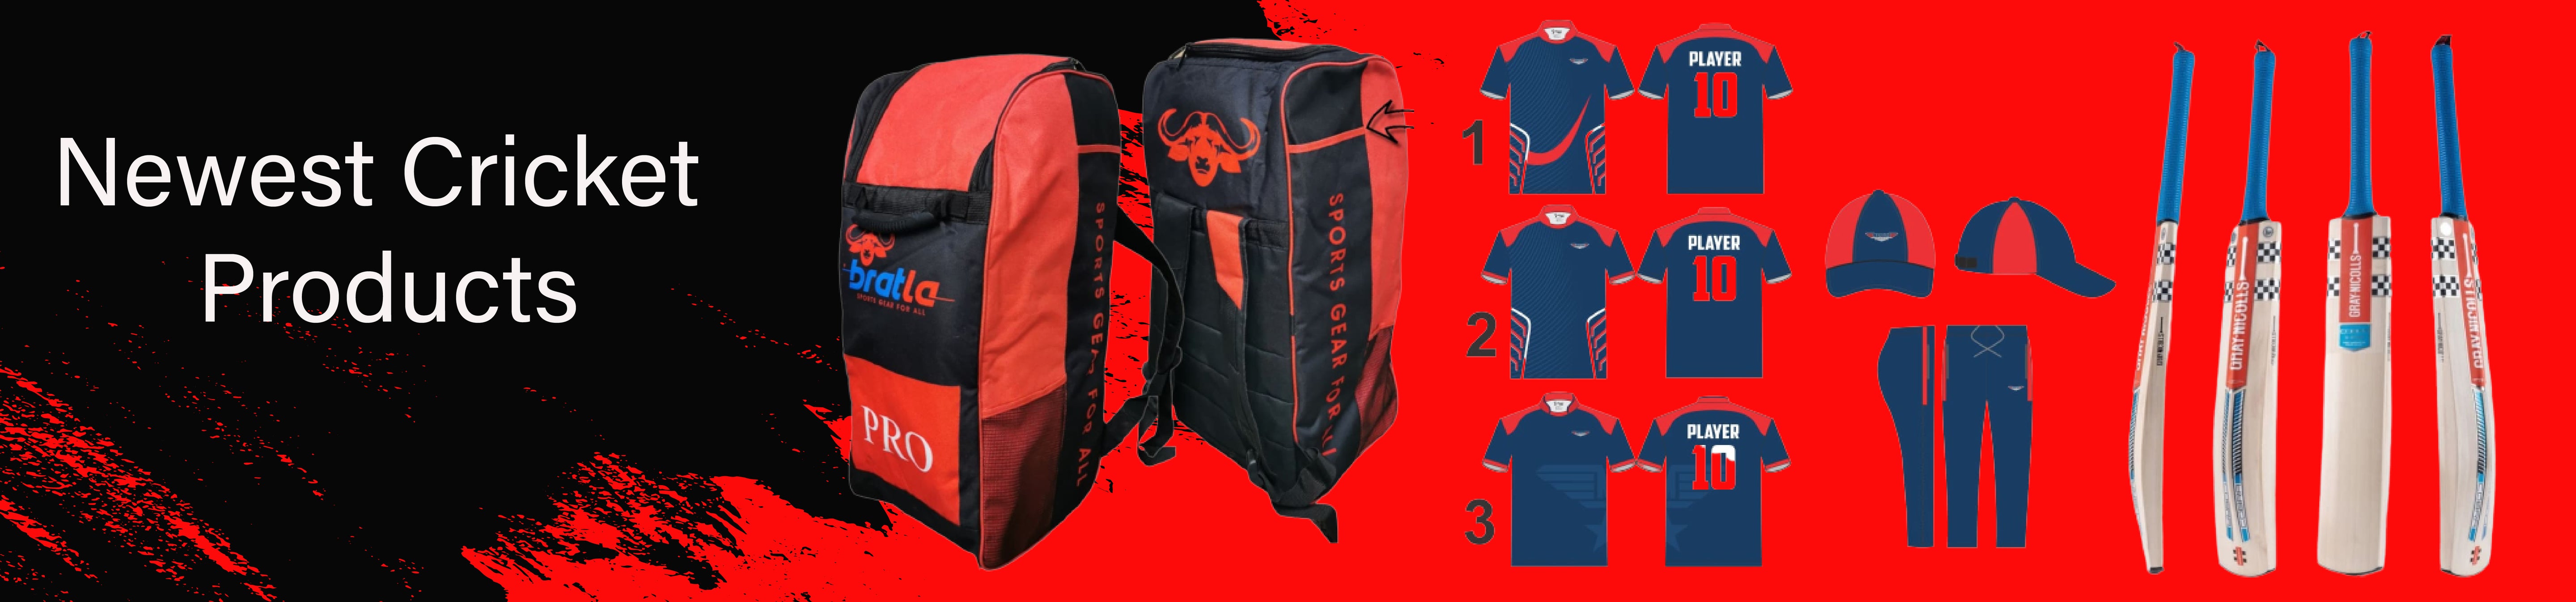 Newest Cricket Products -